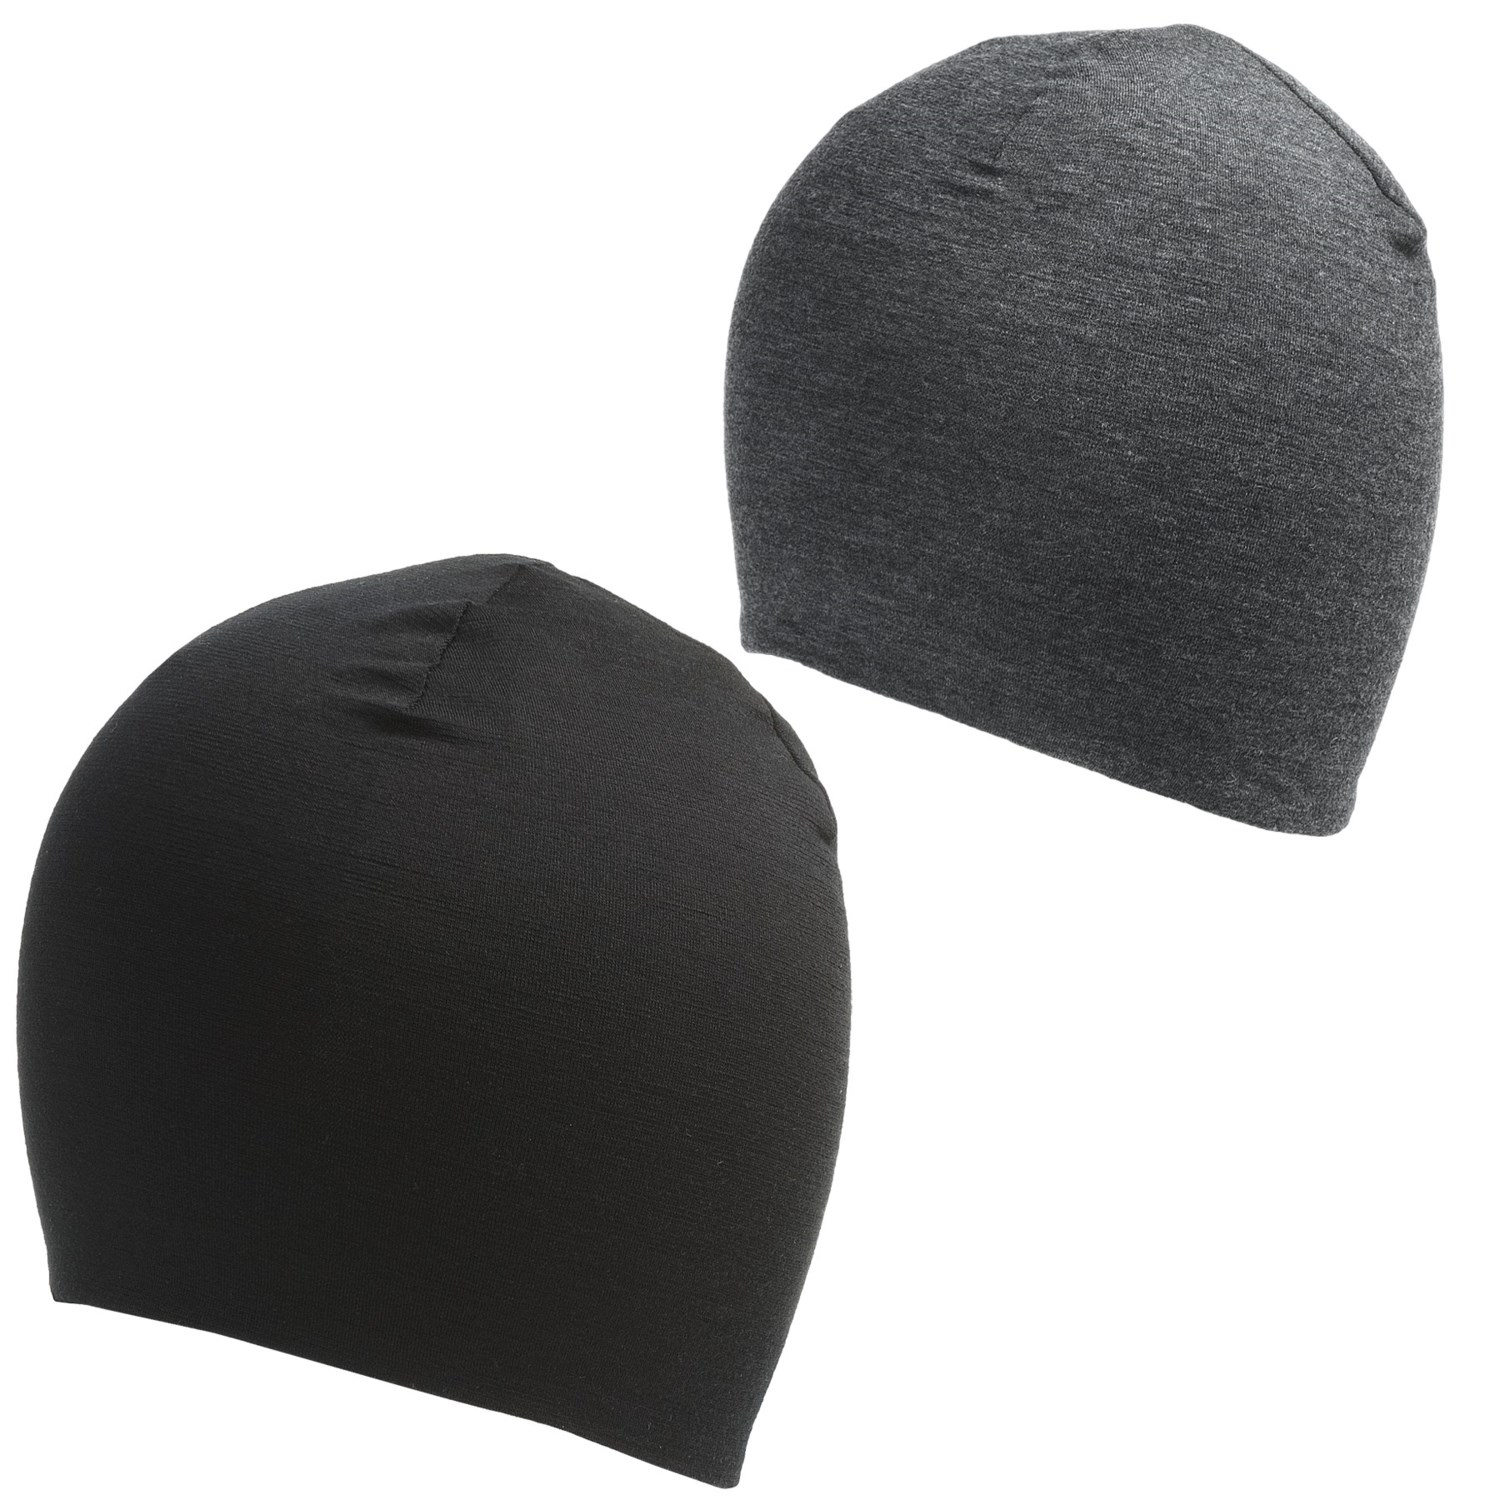 Terramar Thermawool Reversible Beanie (For Men and Women) - Save 53%